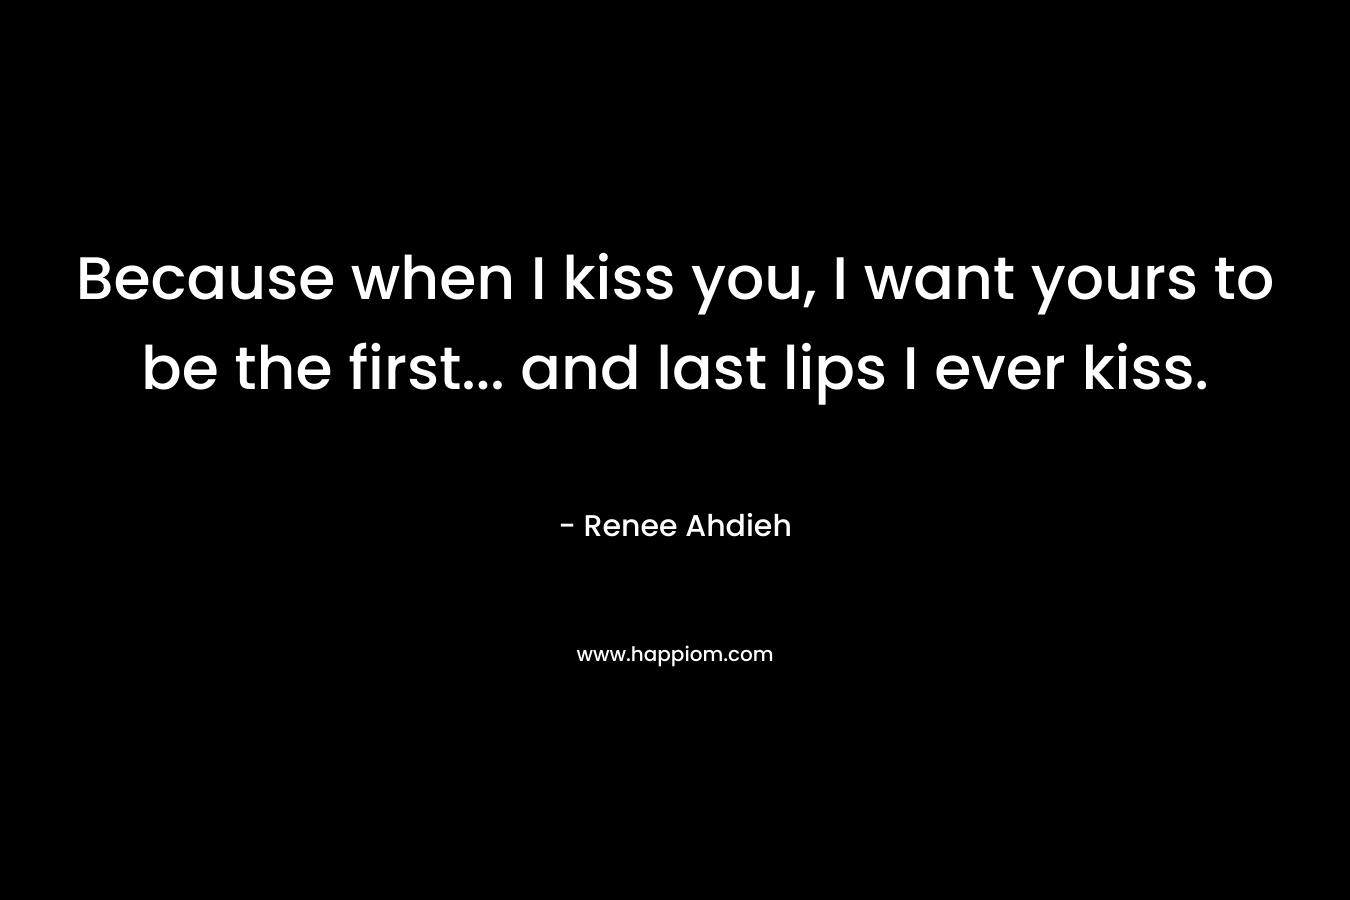 Because when I kiss you, I want yours to be the first… and last lips I ever kiss. – Renee Ahdieh